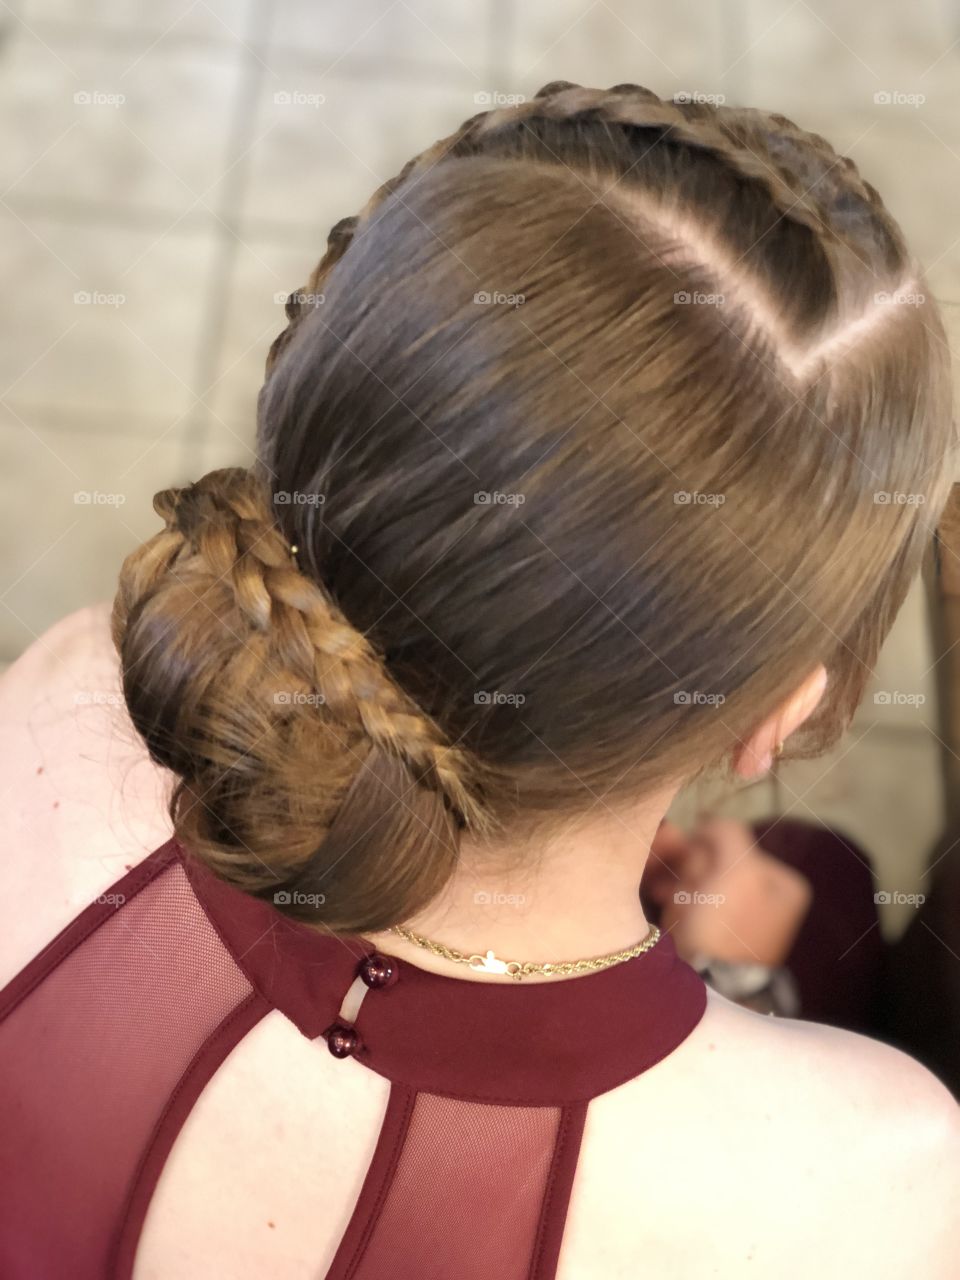 Braided hair model ready for a special event 